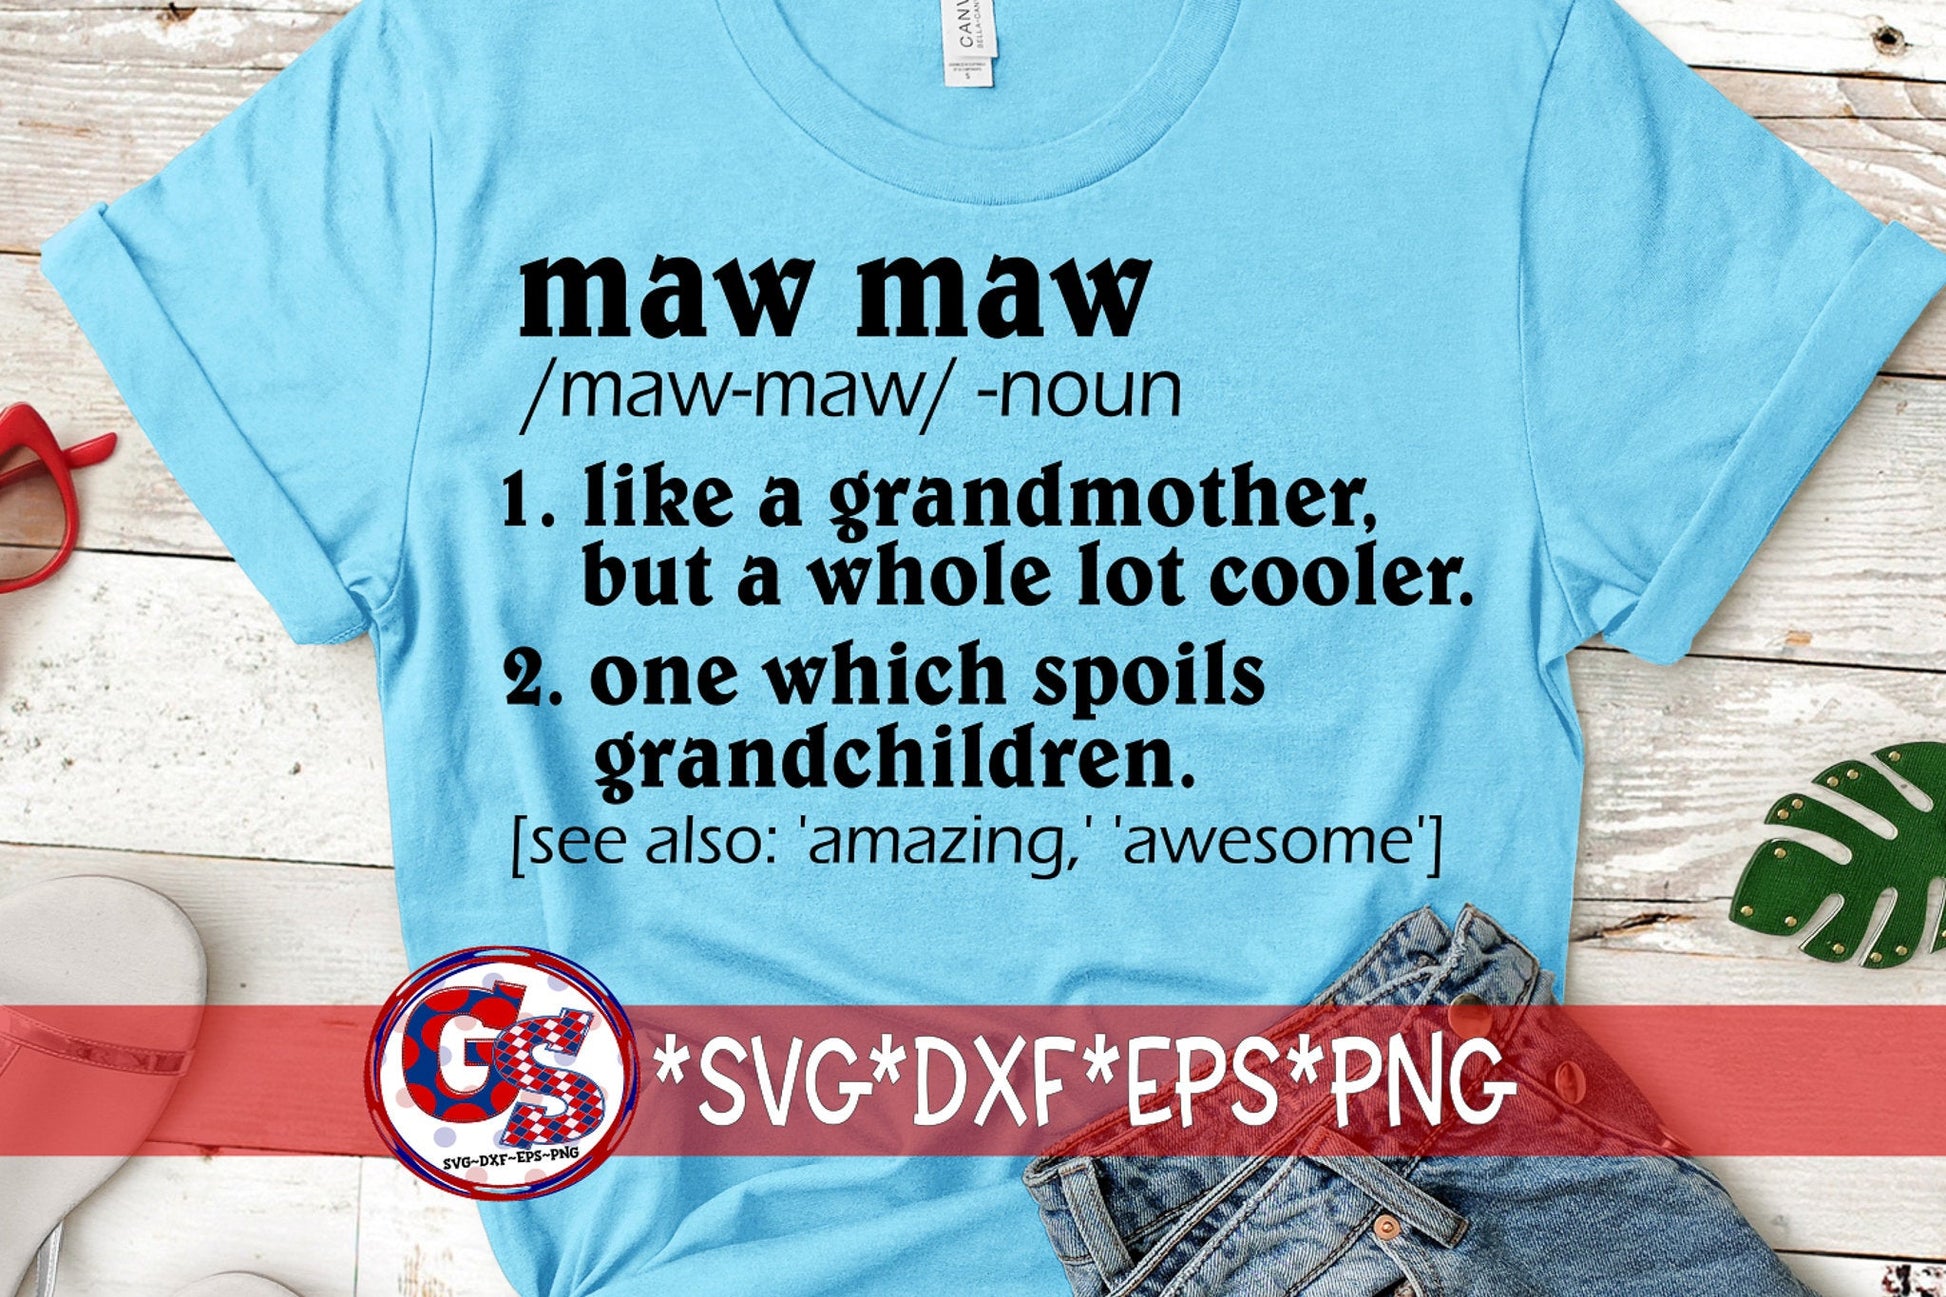 Mother&#39;s Day | Maw Maw Definition svg dxf eps png. Maw maw SVG | Maw Maw Definition SVG | Definition Maw Maw SvG |Instant Download Cut File